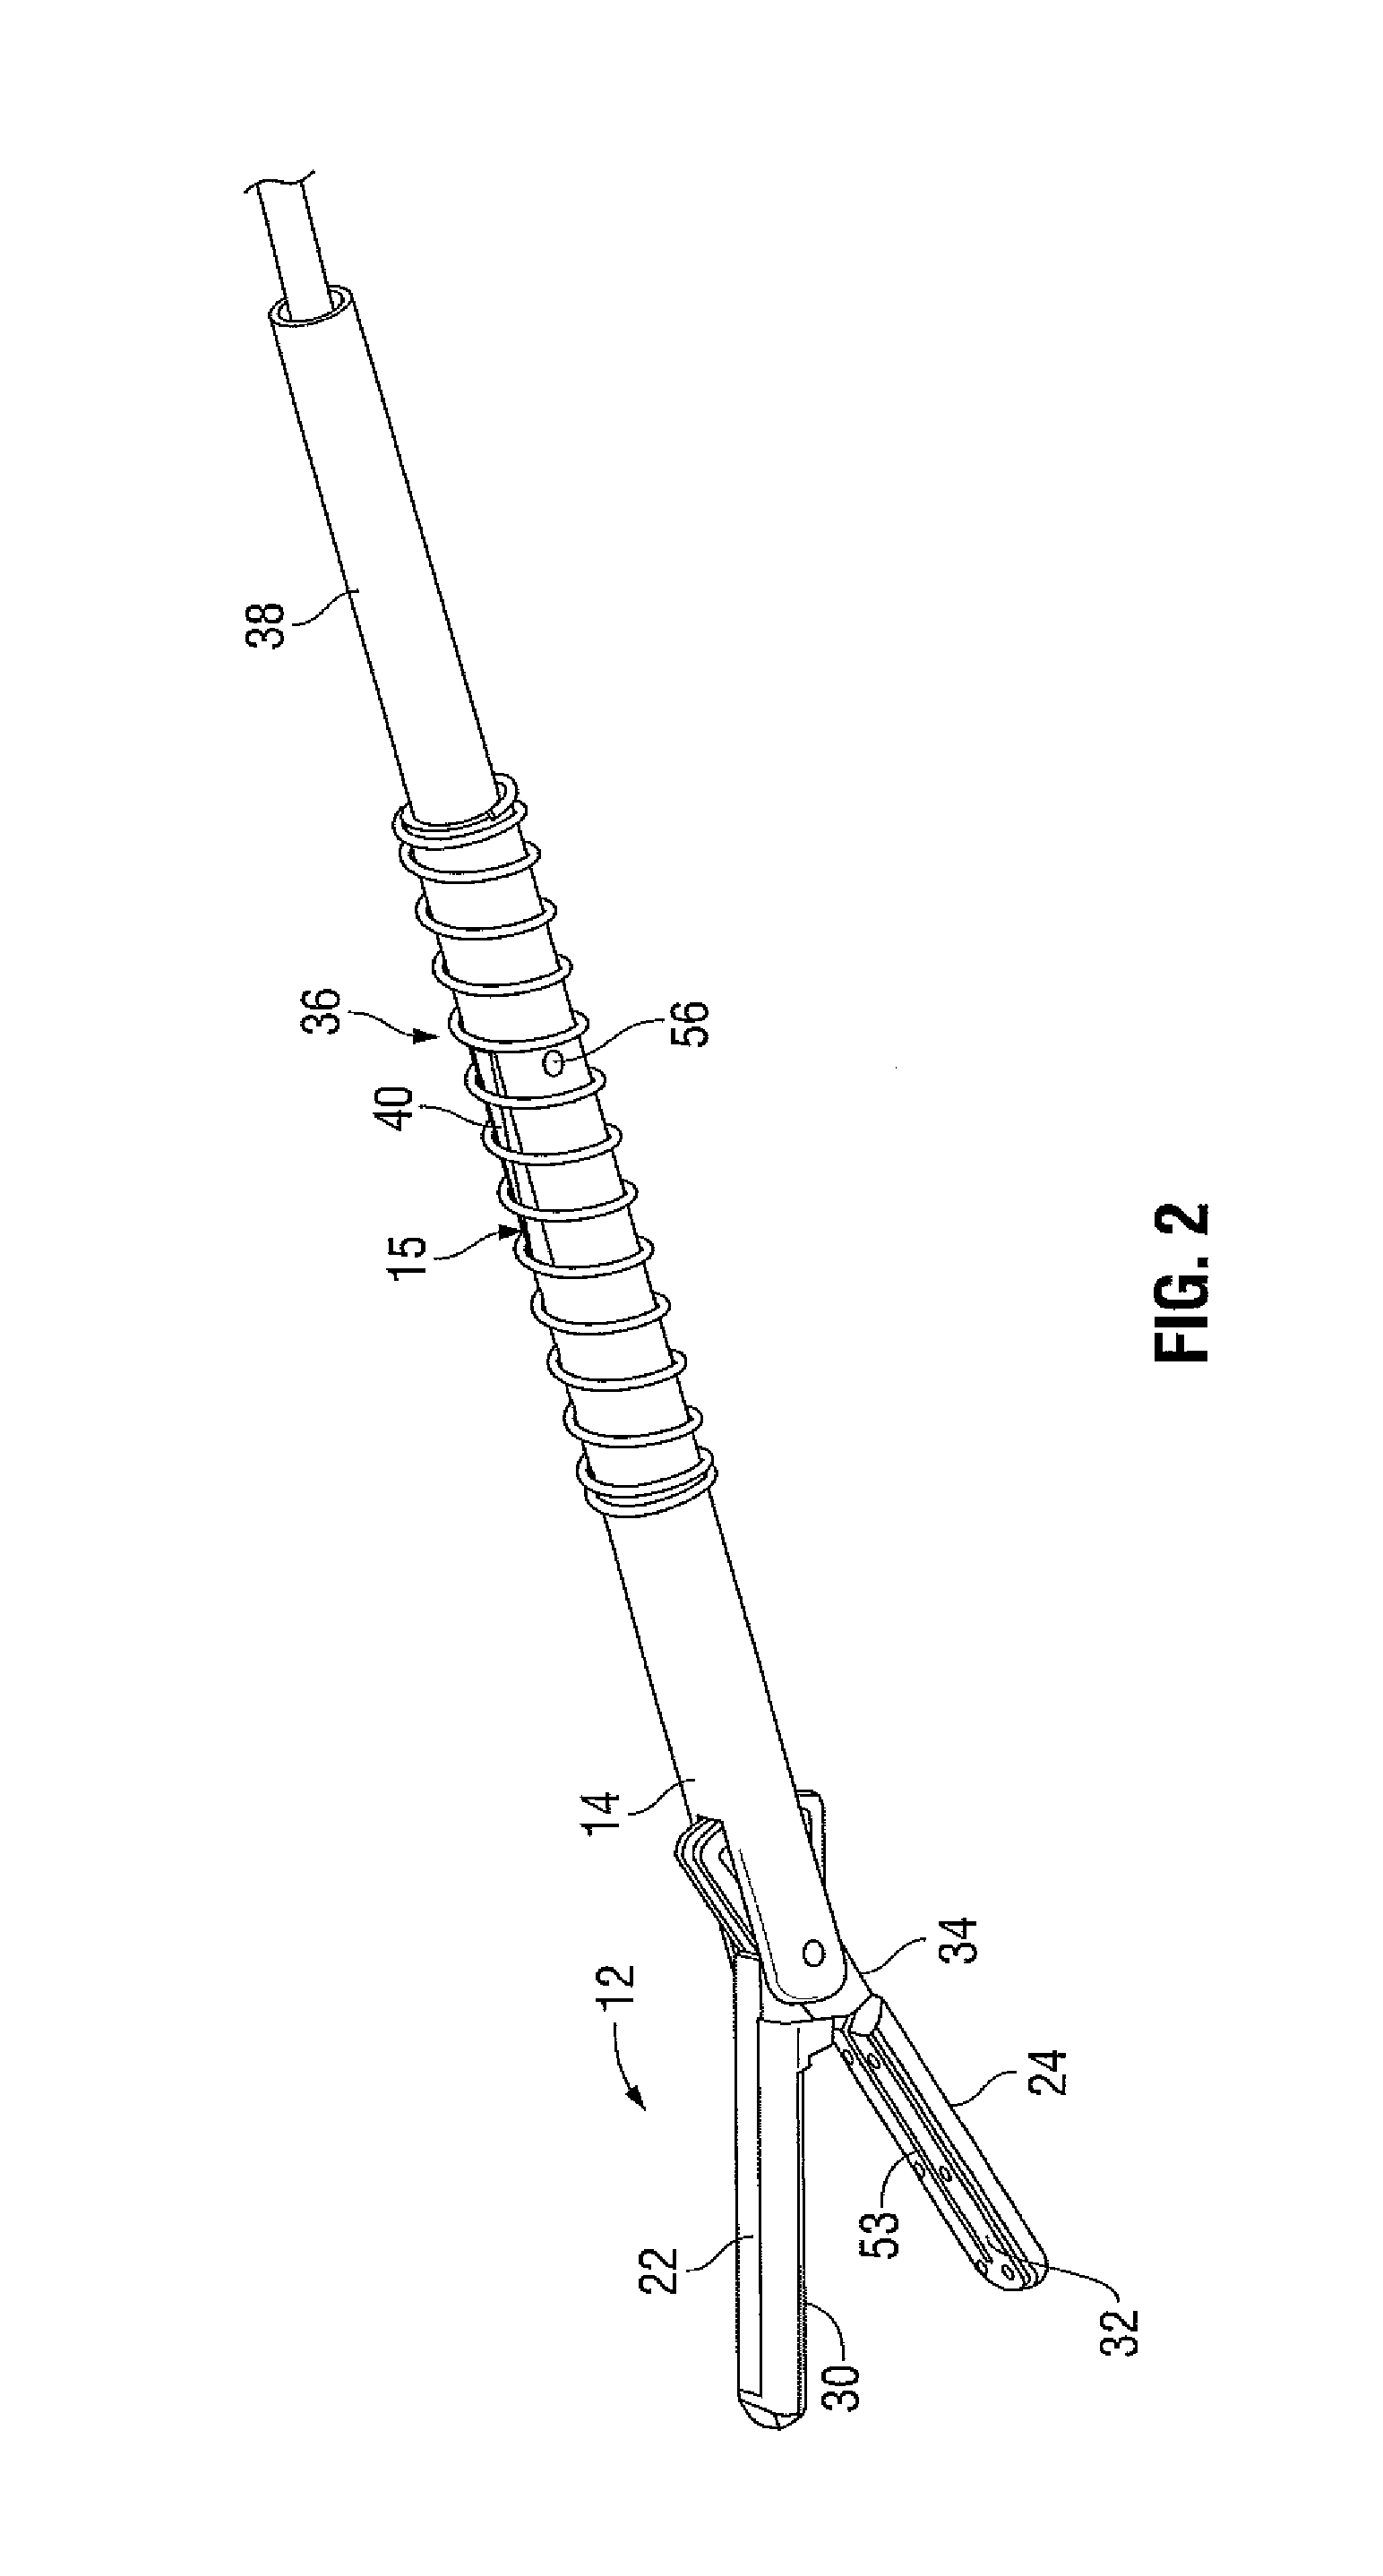 Electrosurgical instrument with a knife blade lockout mechanism